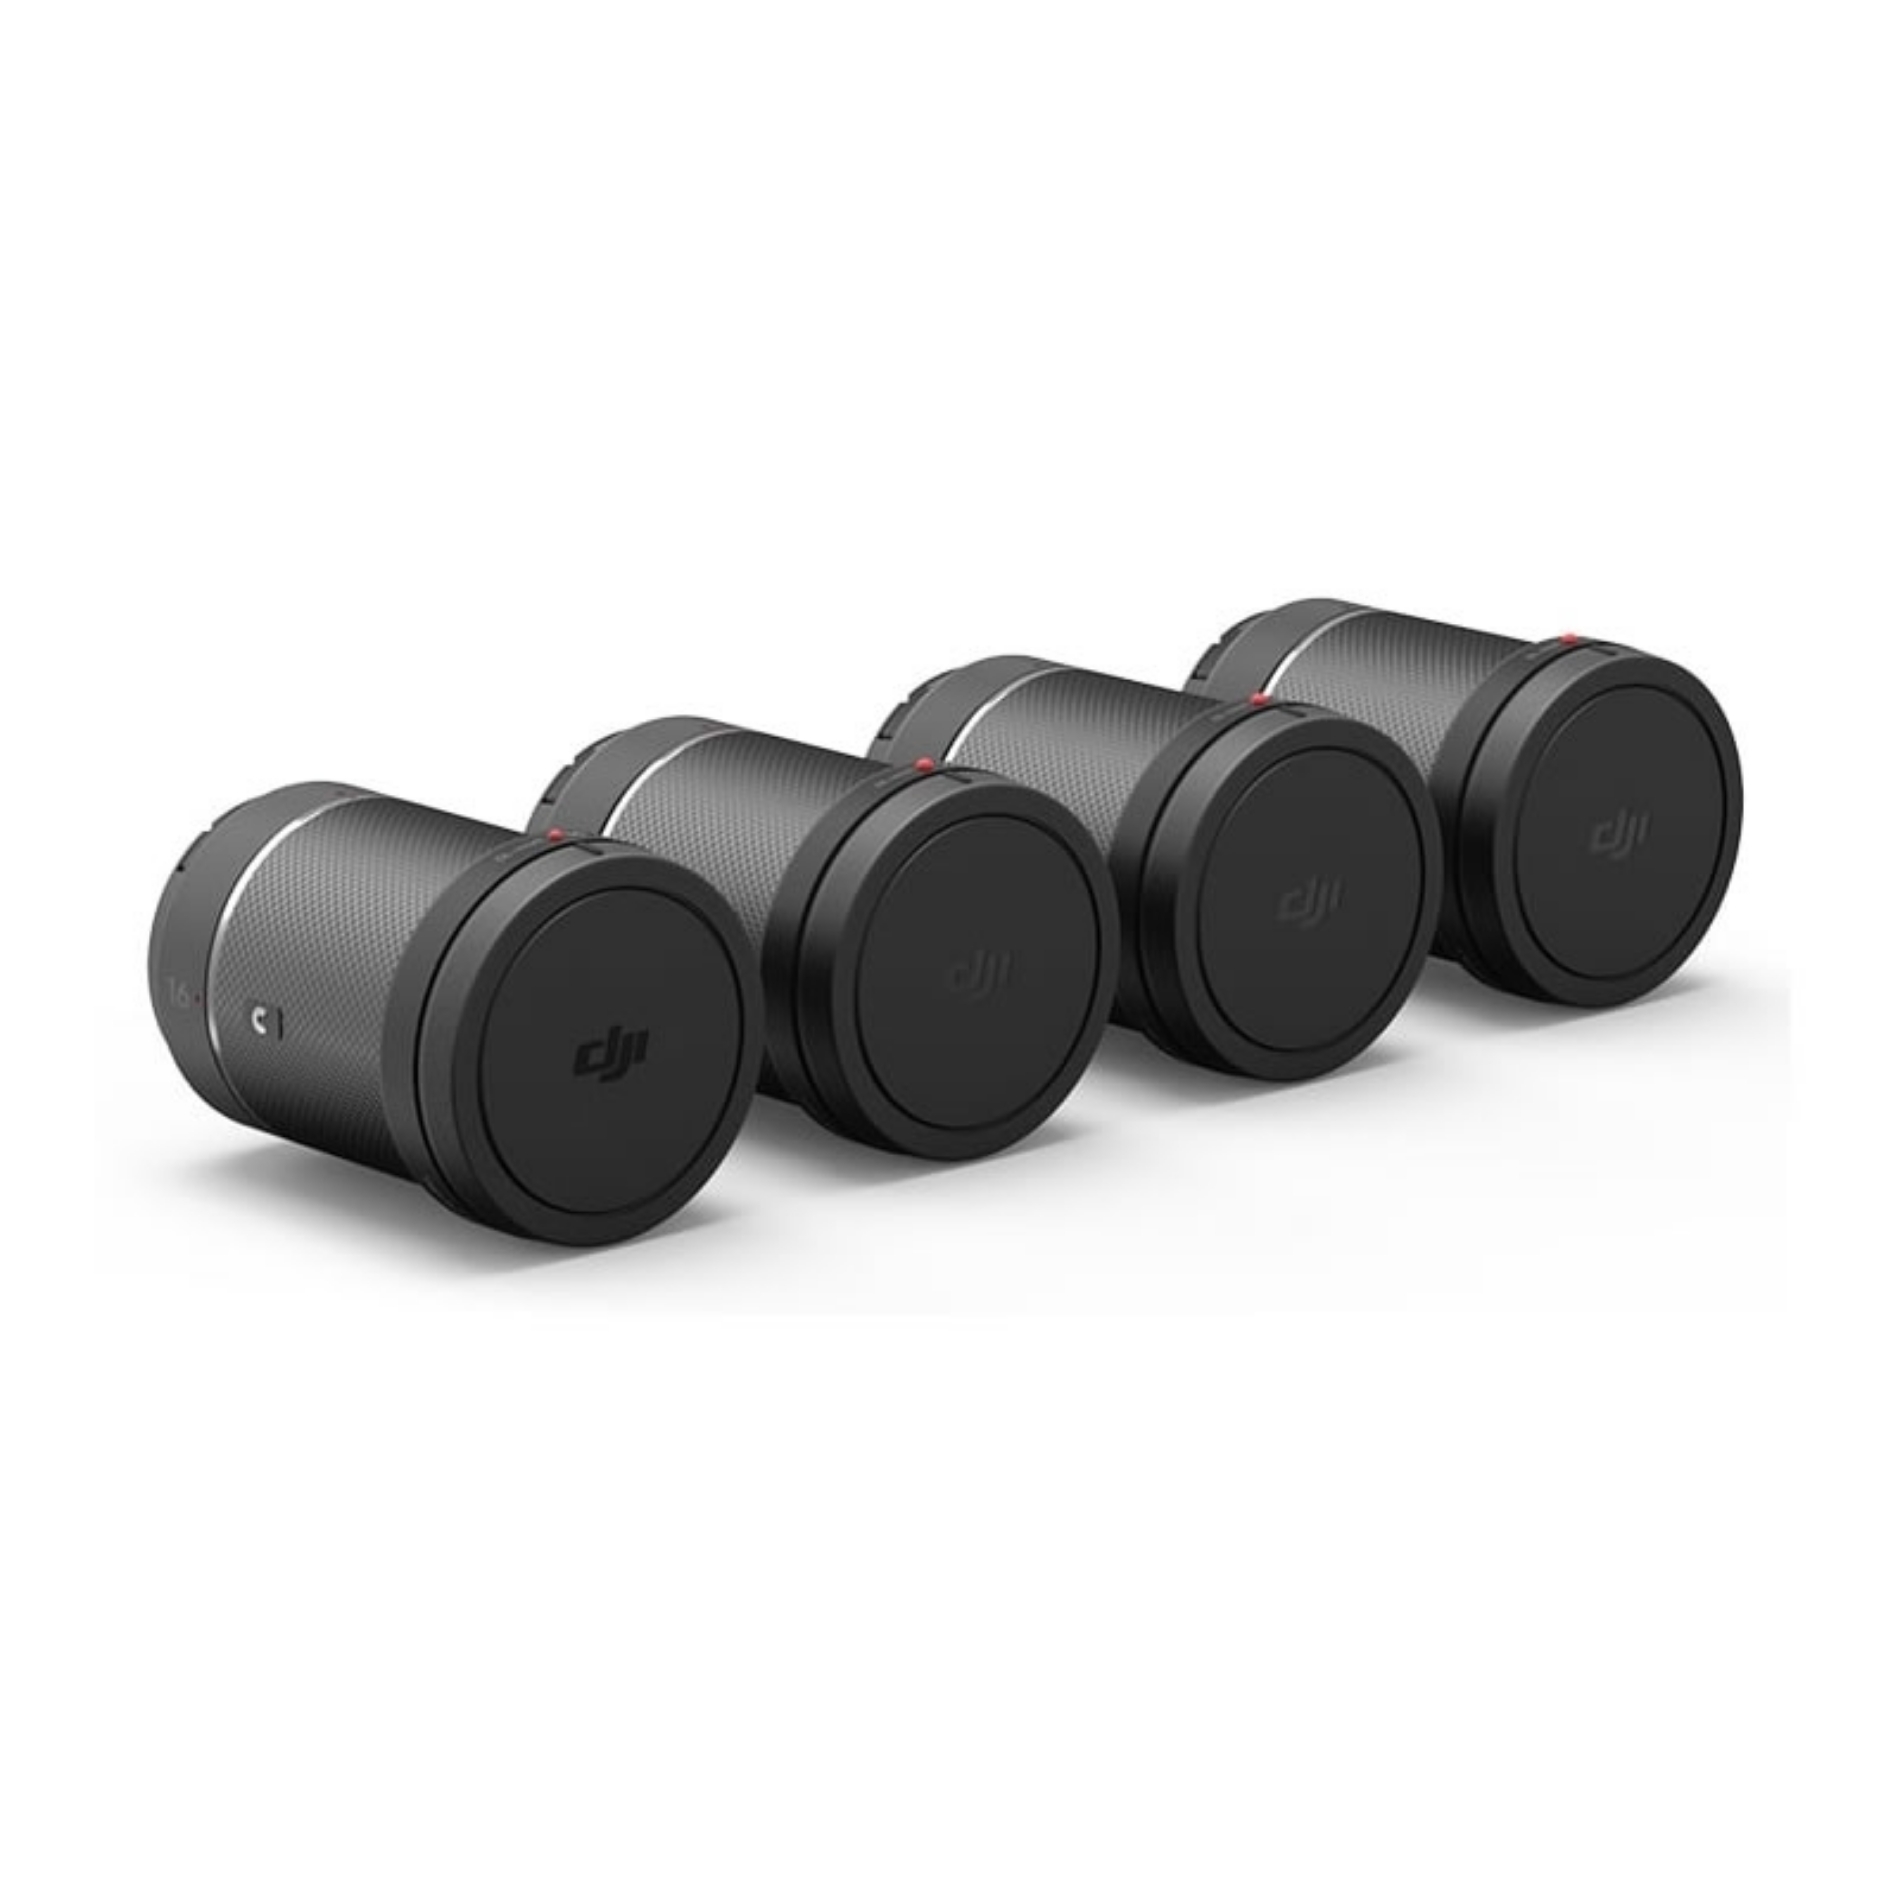 Picture of DJI Zenmuse X7 DL/DL-S Lens Set